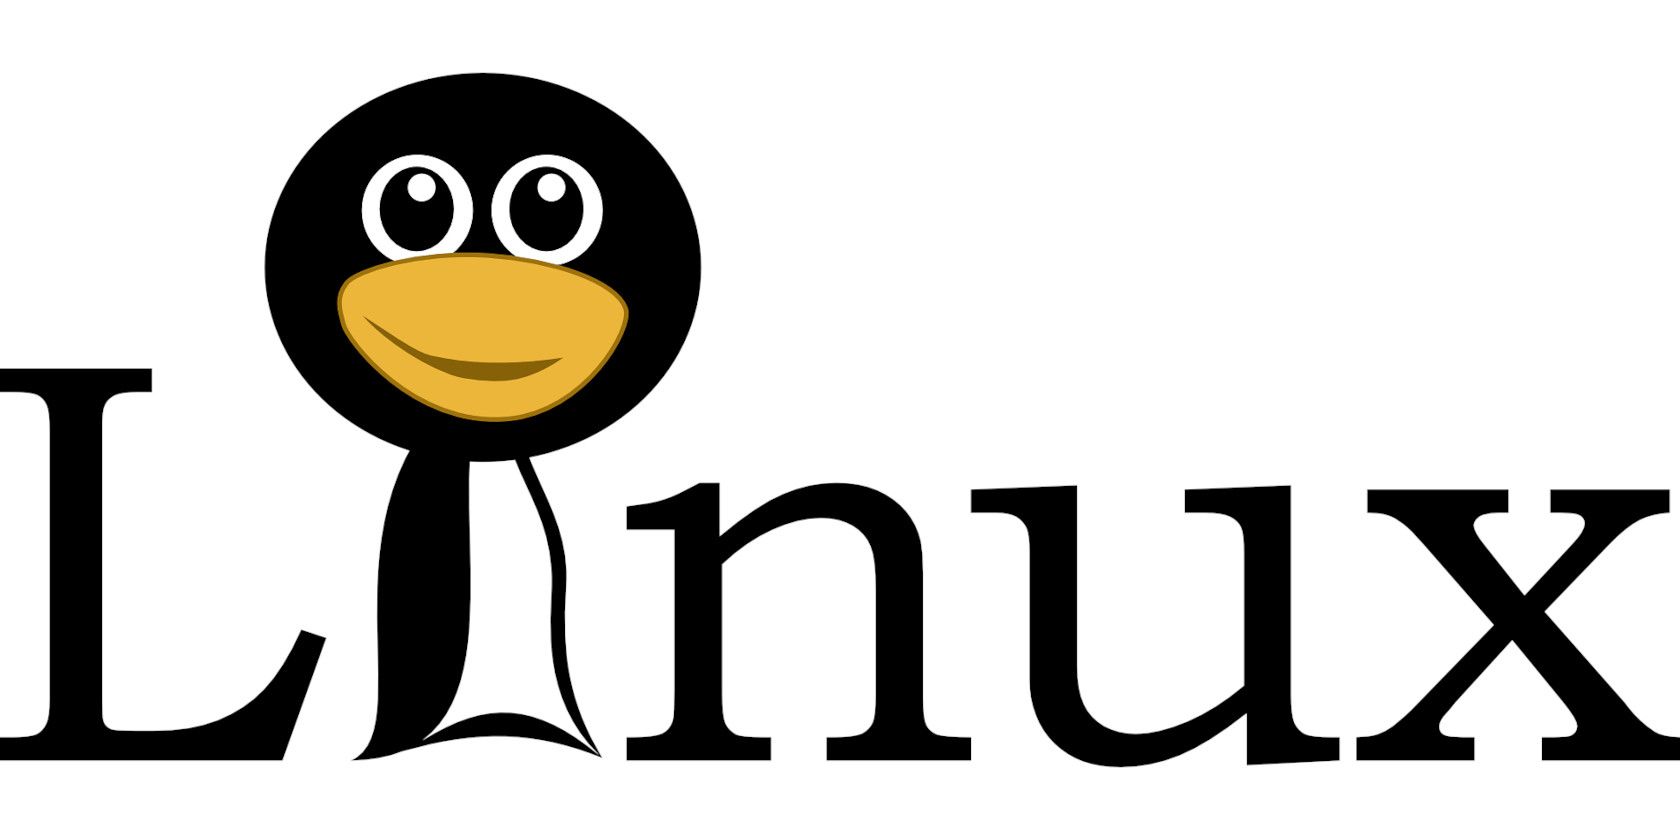 Linux with a pengiun as the I letter